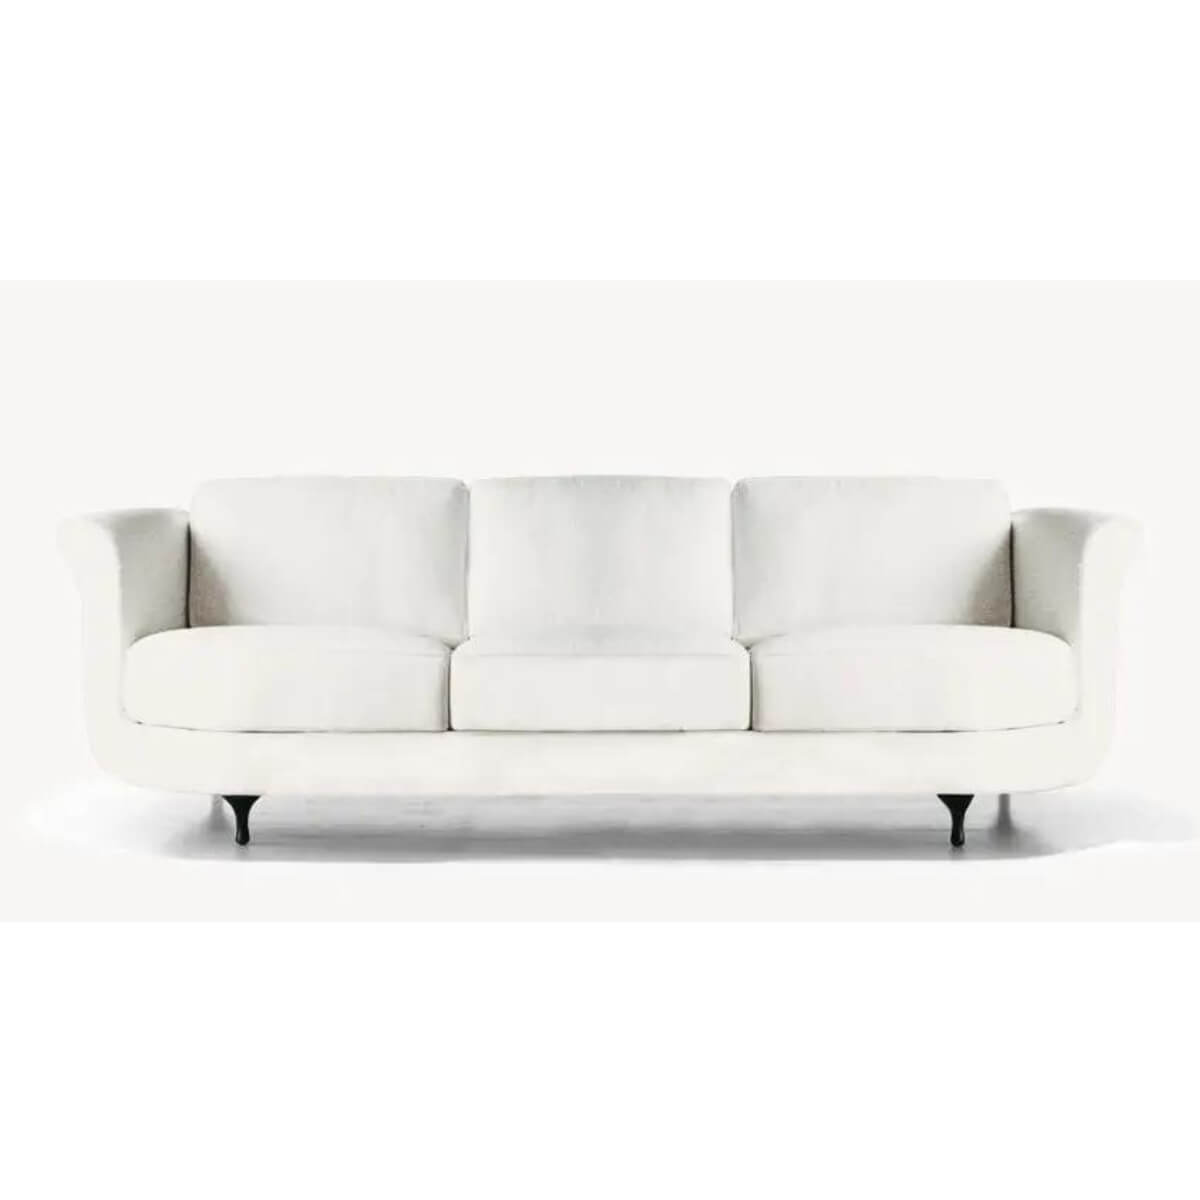 AquaFusion Cotton Linen Sofa: Luxury and Comfort in One